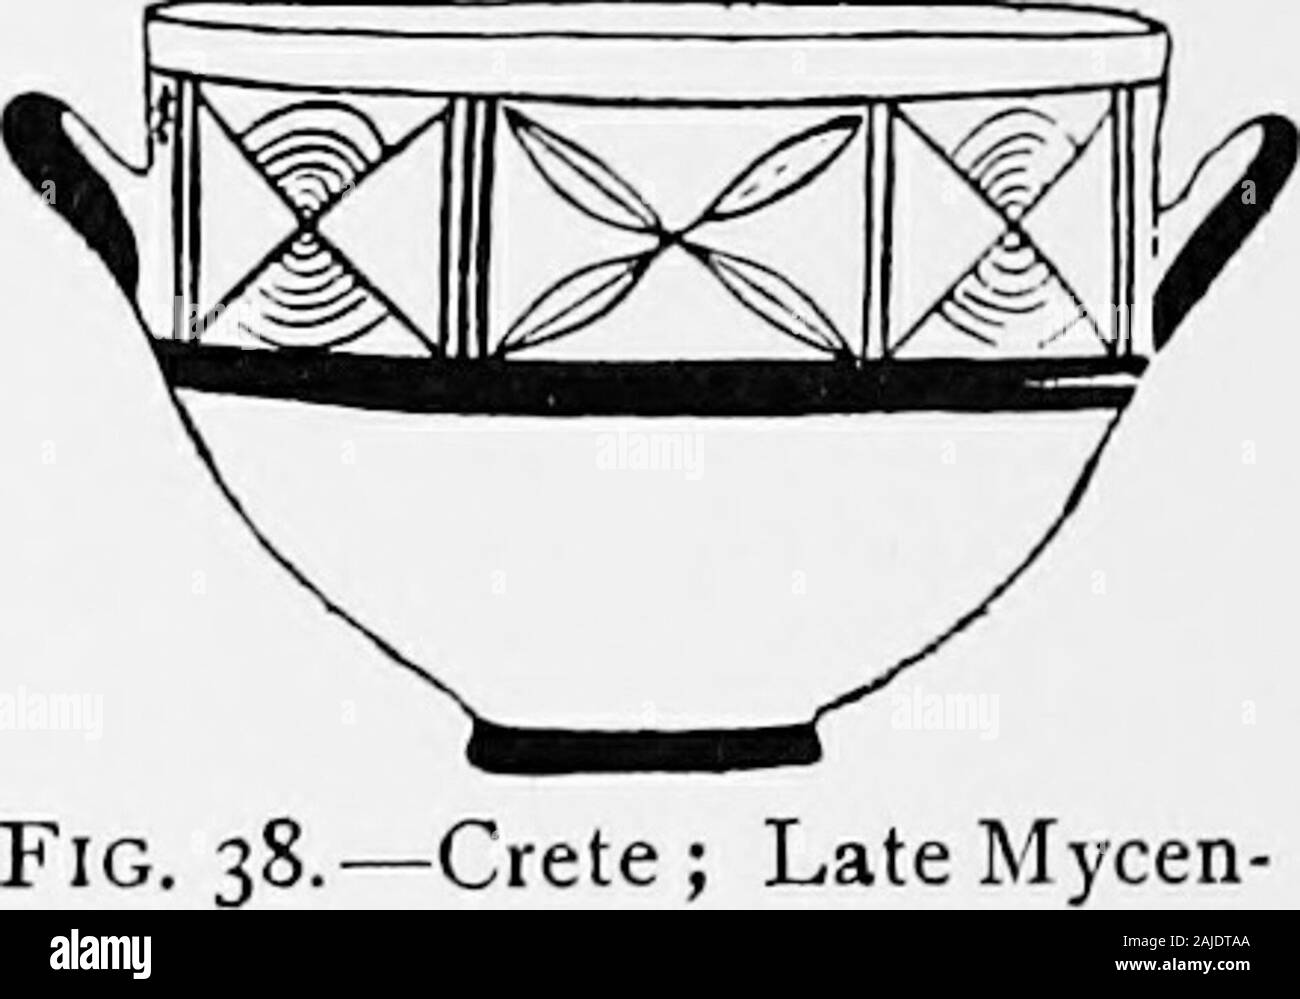 Ægean archæeology; an introduction to the archæeology of prehistoric Greece . ich are eventuallyoverlaid by the Geometric pottery of^Mycena^nTa/jUnd the Early Irou Age. In the develop-kraier: Pakikastro. mcnt of this they cxerciscd a very greatCandia Museum, influence,audiu thesucccedingTroto-Scaie, I, A; 2, tV. Corinthian style of the eighth and theseventh centuries we see undoubted traces of the oldMycenaean ceramic art. The technique of vase-paintingremains the same ; the Minoan tradition was never lost.From this chapter we have seen how important aplace the study of pottery takesin the rec Stock Photo